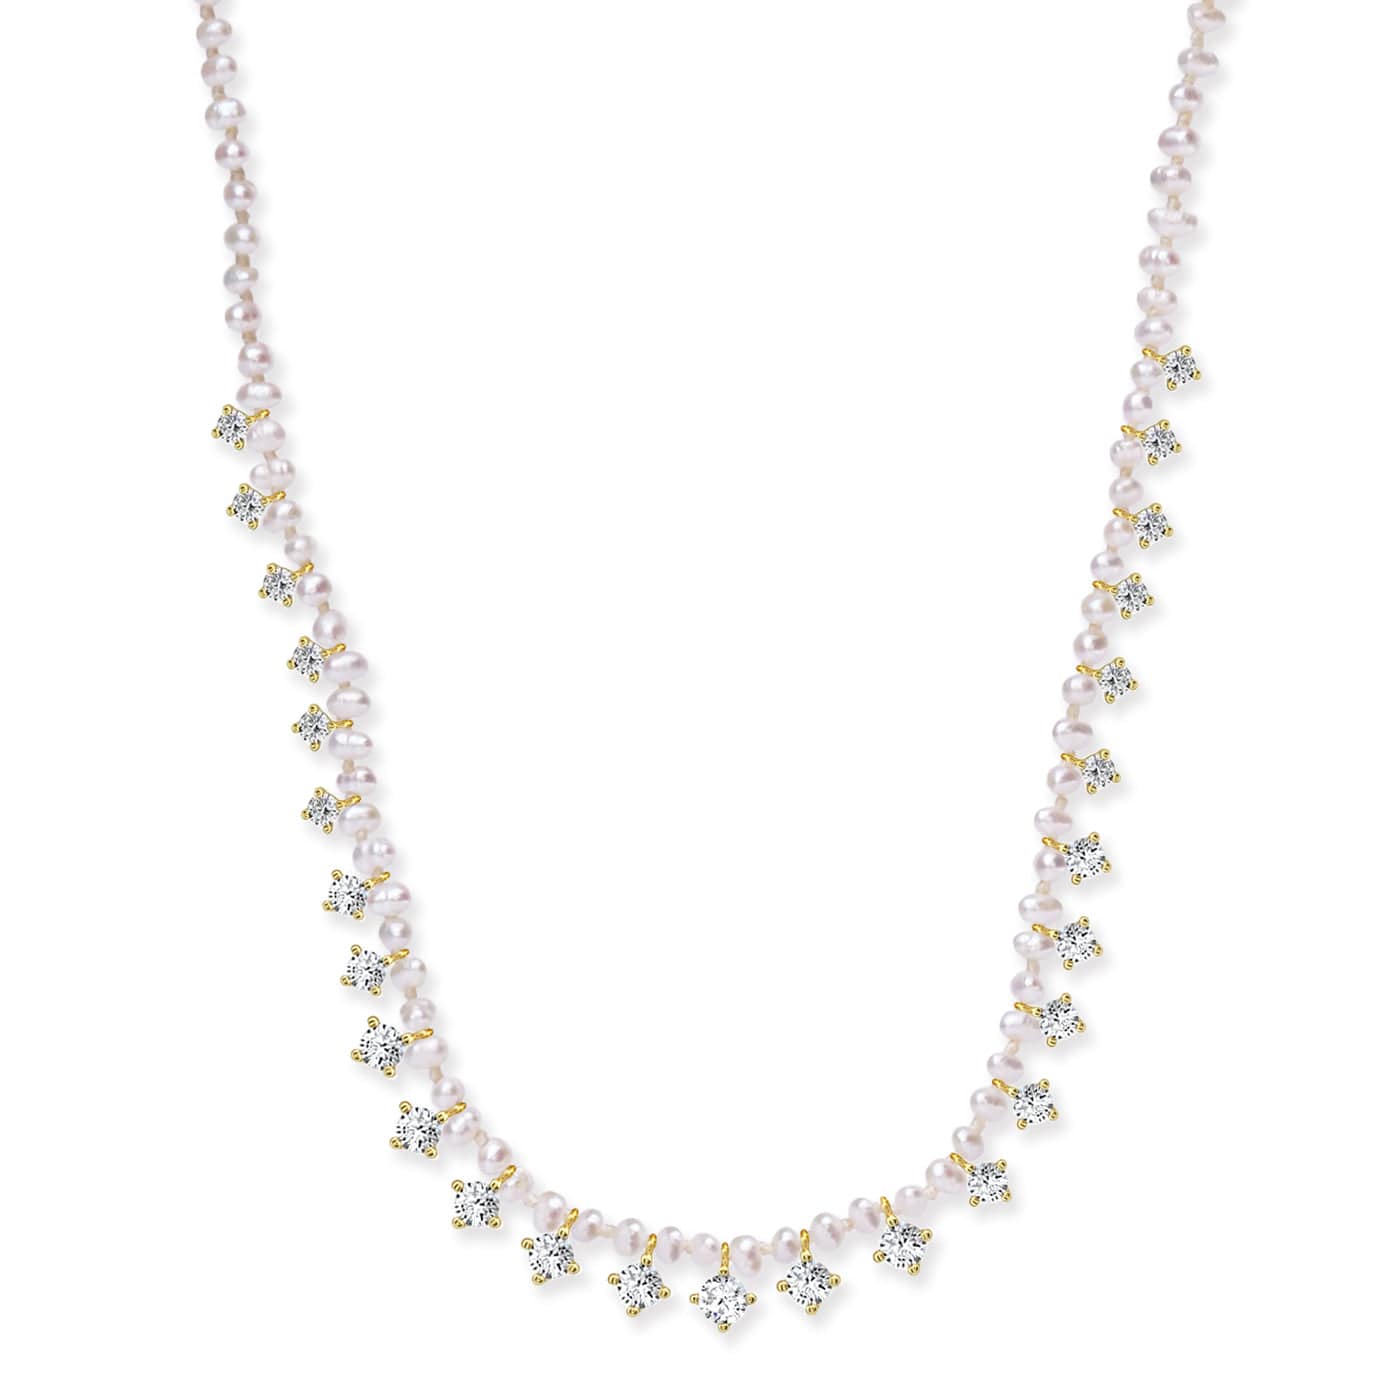 TAI JEWELRY Necklace Handmade Pearl Beaded Necklace with Graduated CZ Stones